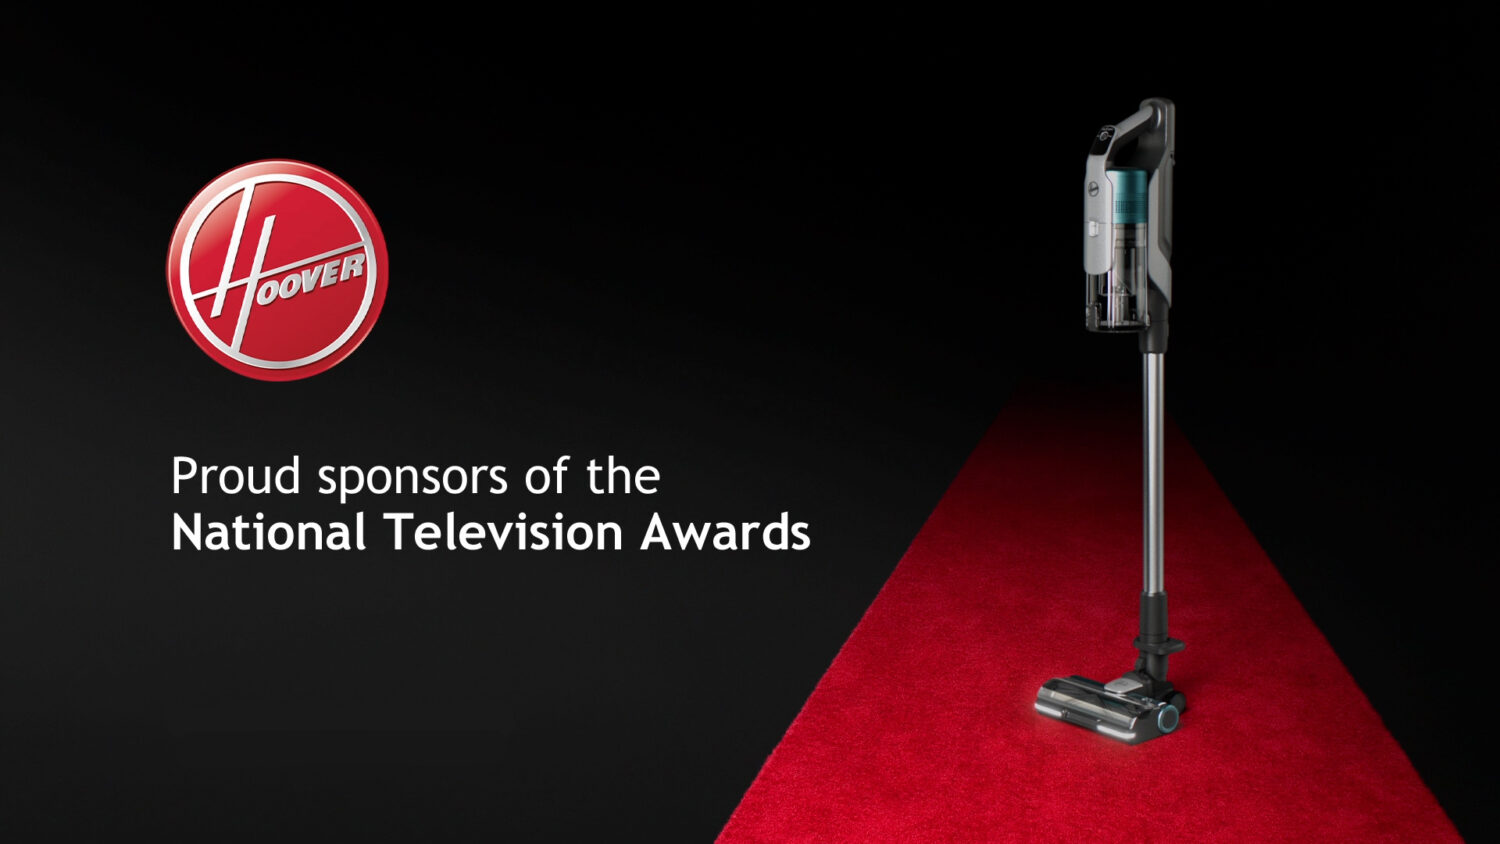 Hoover sponsors the National Television Awards, promoting its new HF9  Cordless vac – ERT